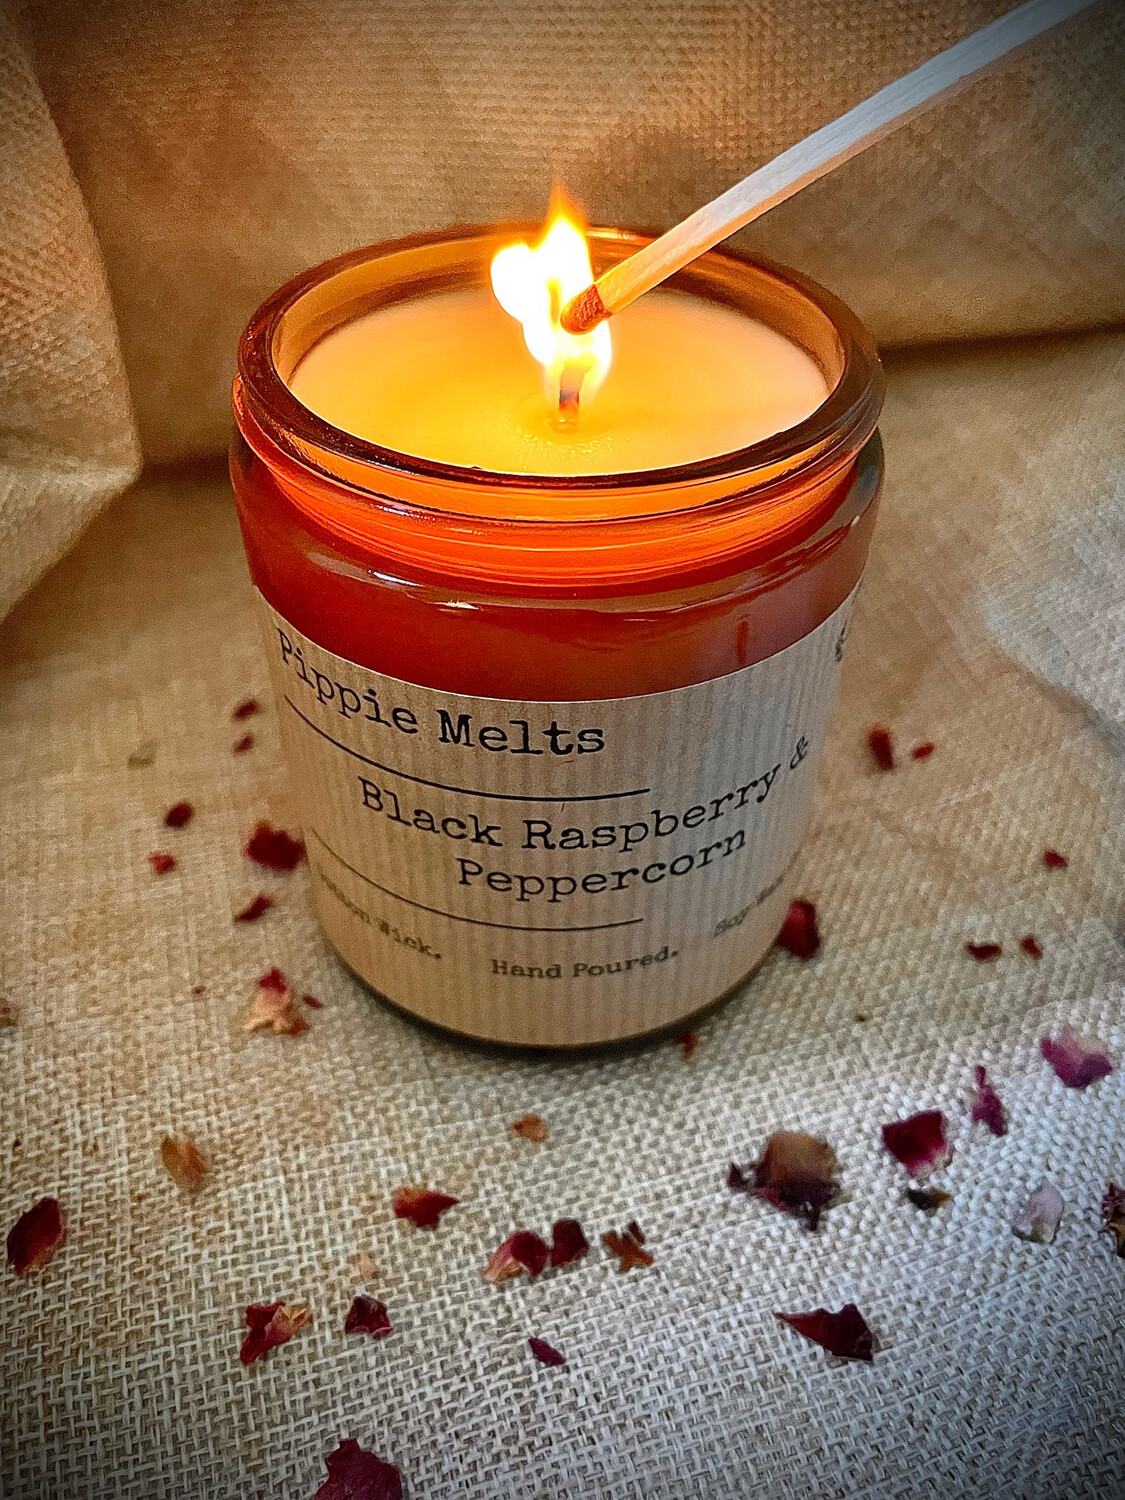 Black Raspberry & Peppercorn - Apothecary Candle